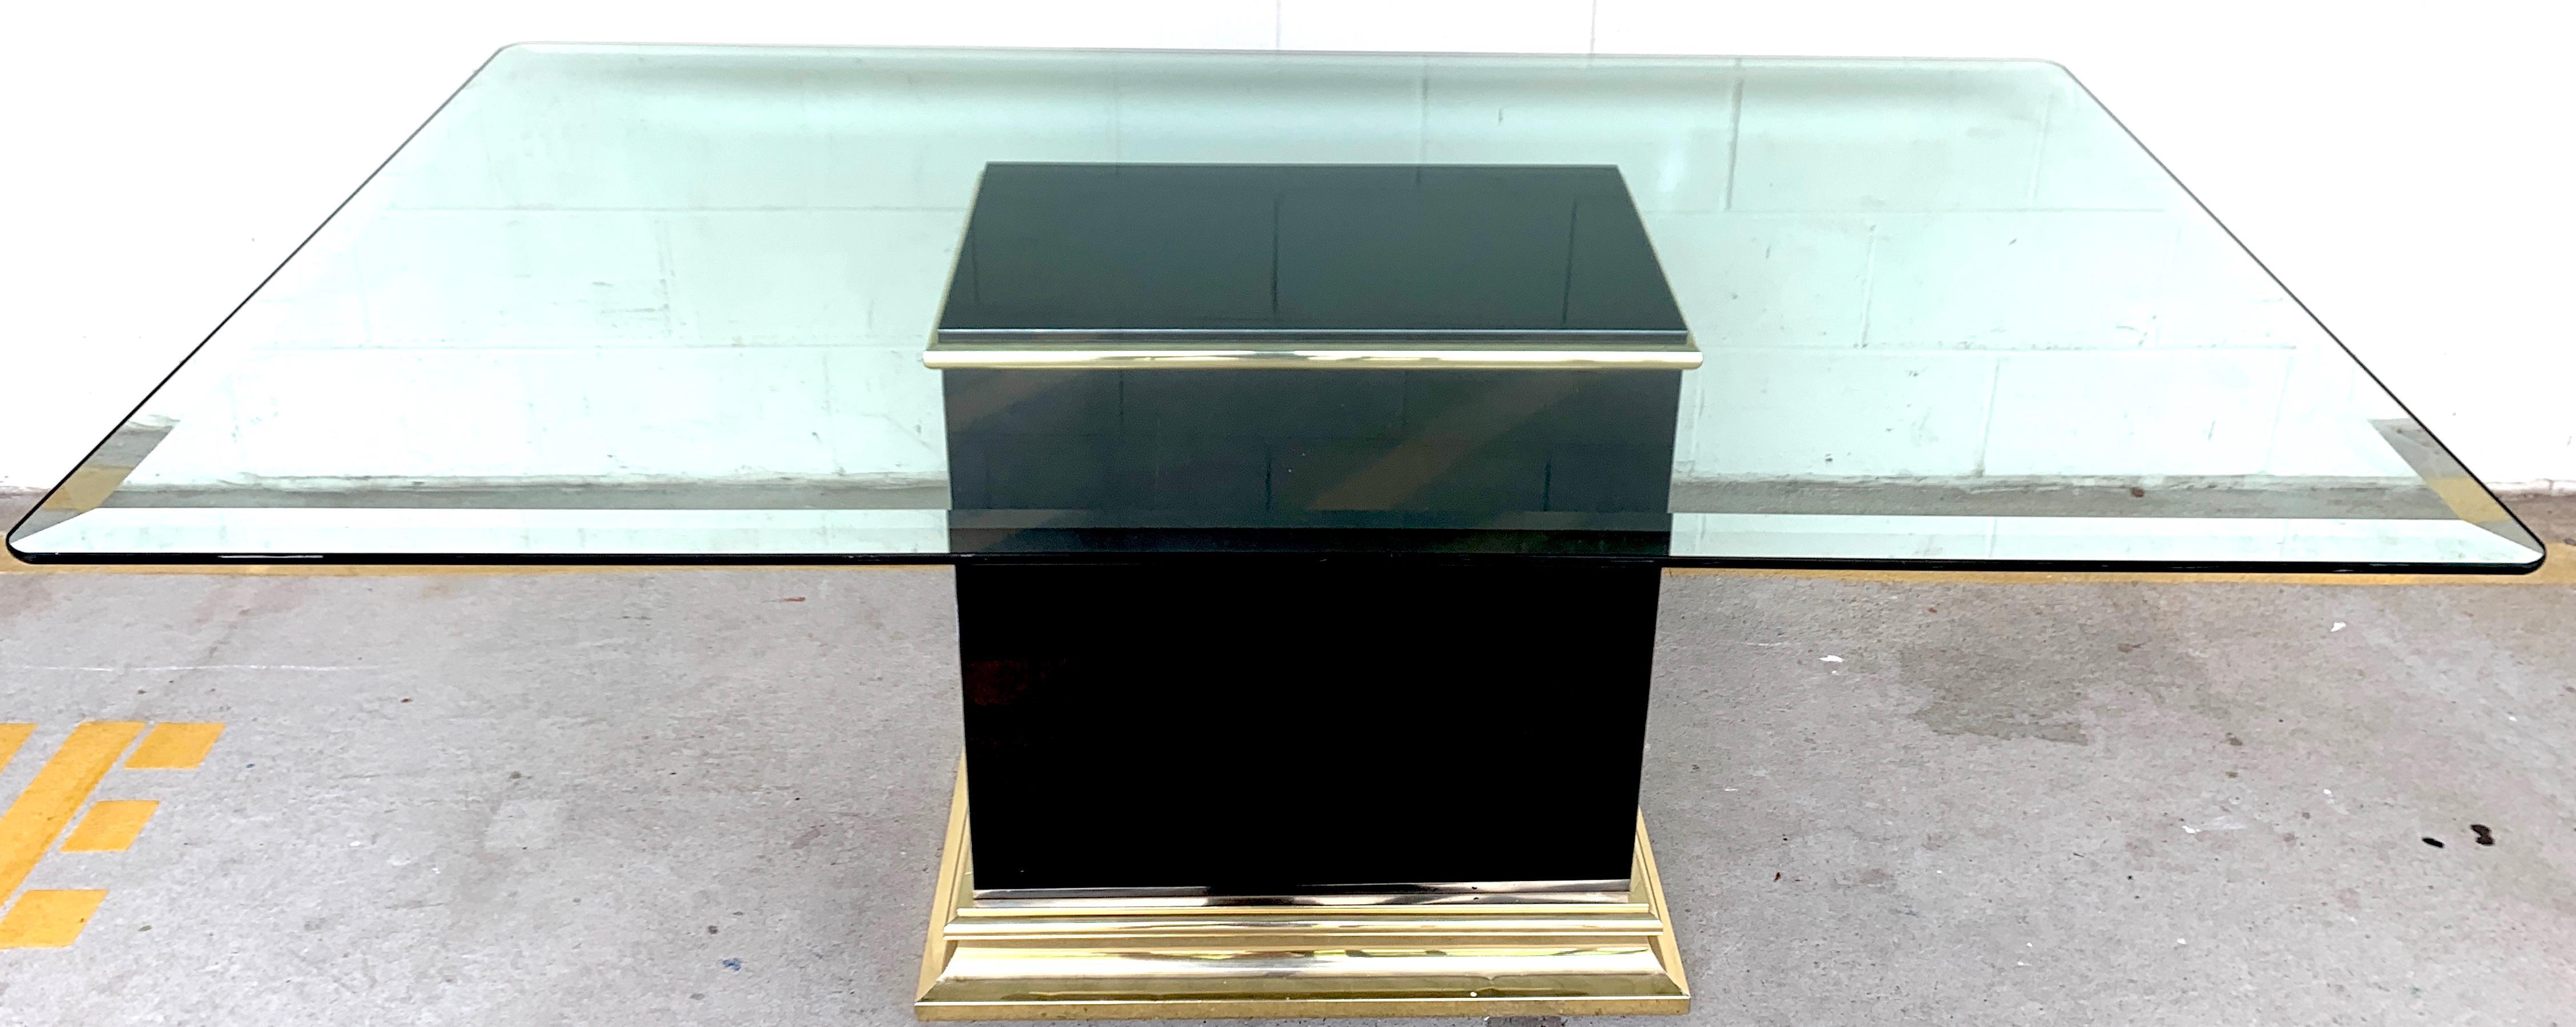 Pierre Cardin black lacquer & brass pedestal dining room/ conference table, 1989
Black Lacquer & Brass Column Pedestal table base with Beveled 72